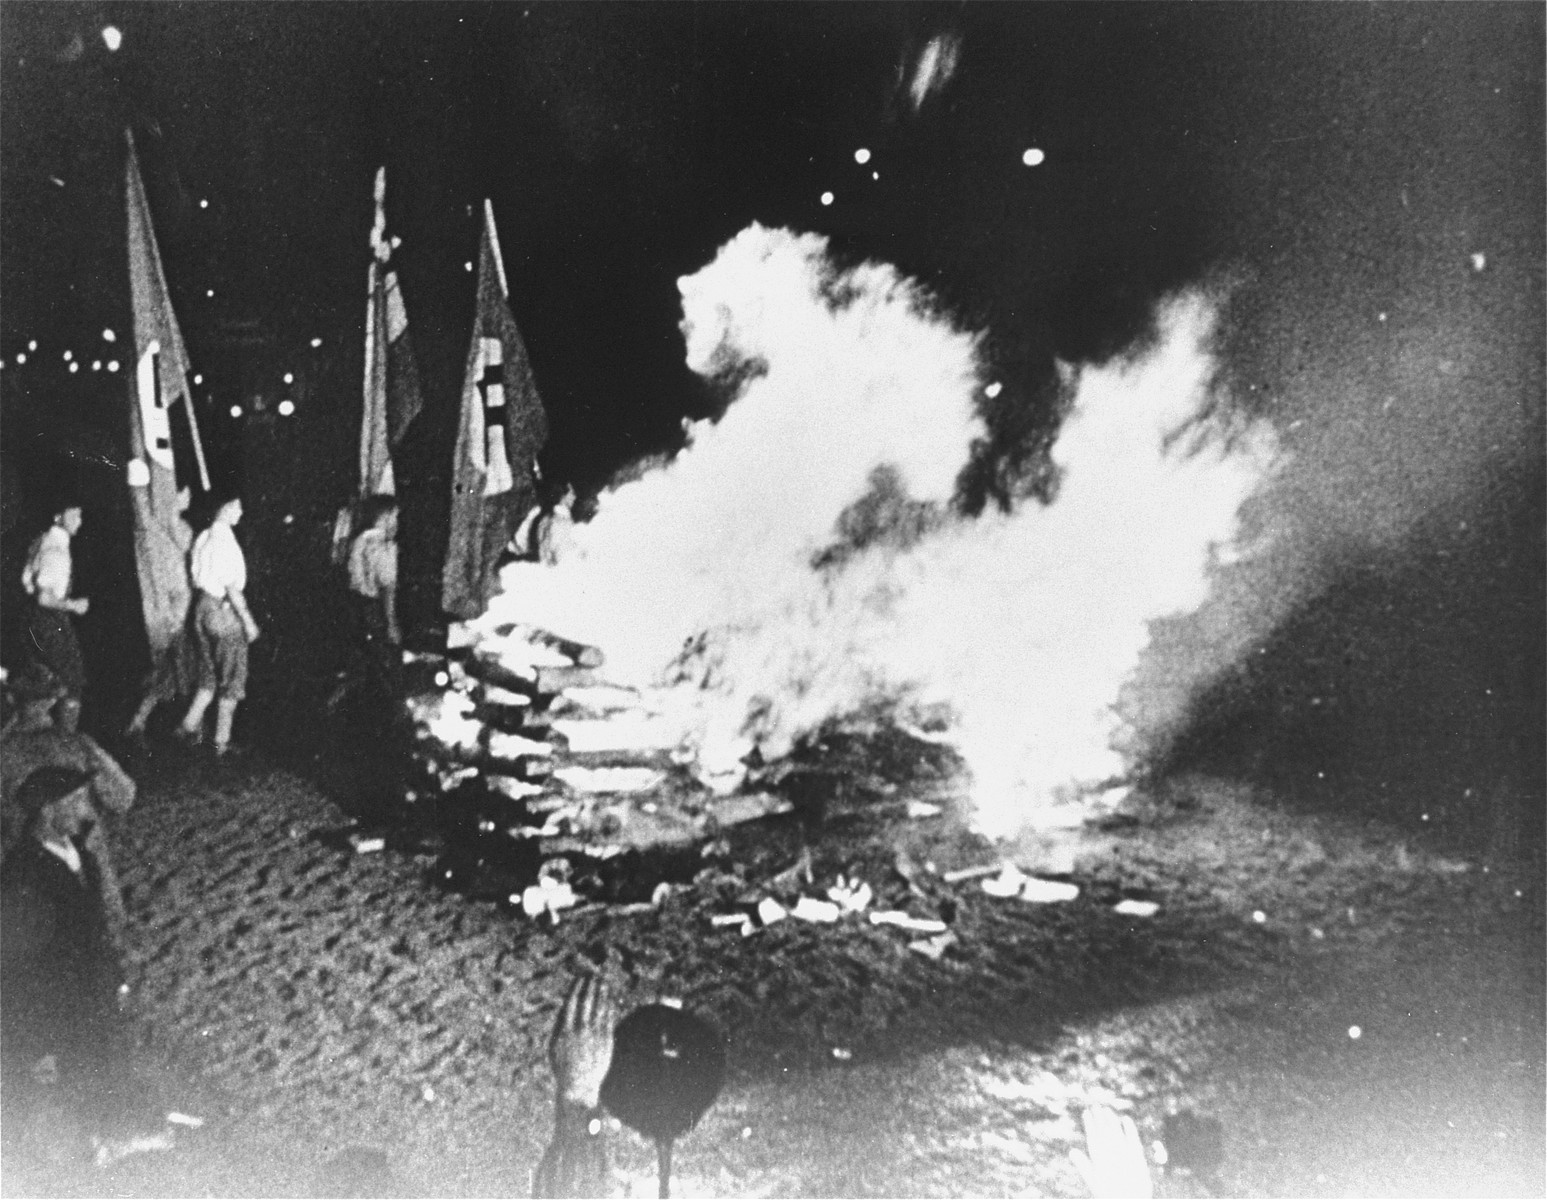 Students carrying Nazi flags march around the bonfire of "un-German" books on the Opernplatz in Berlin. 

Still from a motion picture.